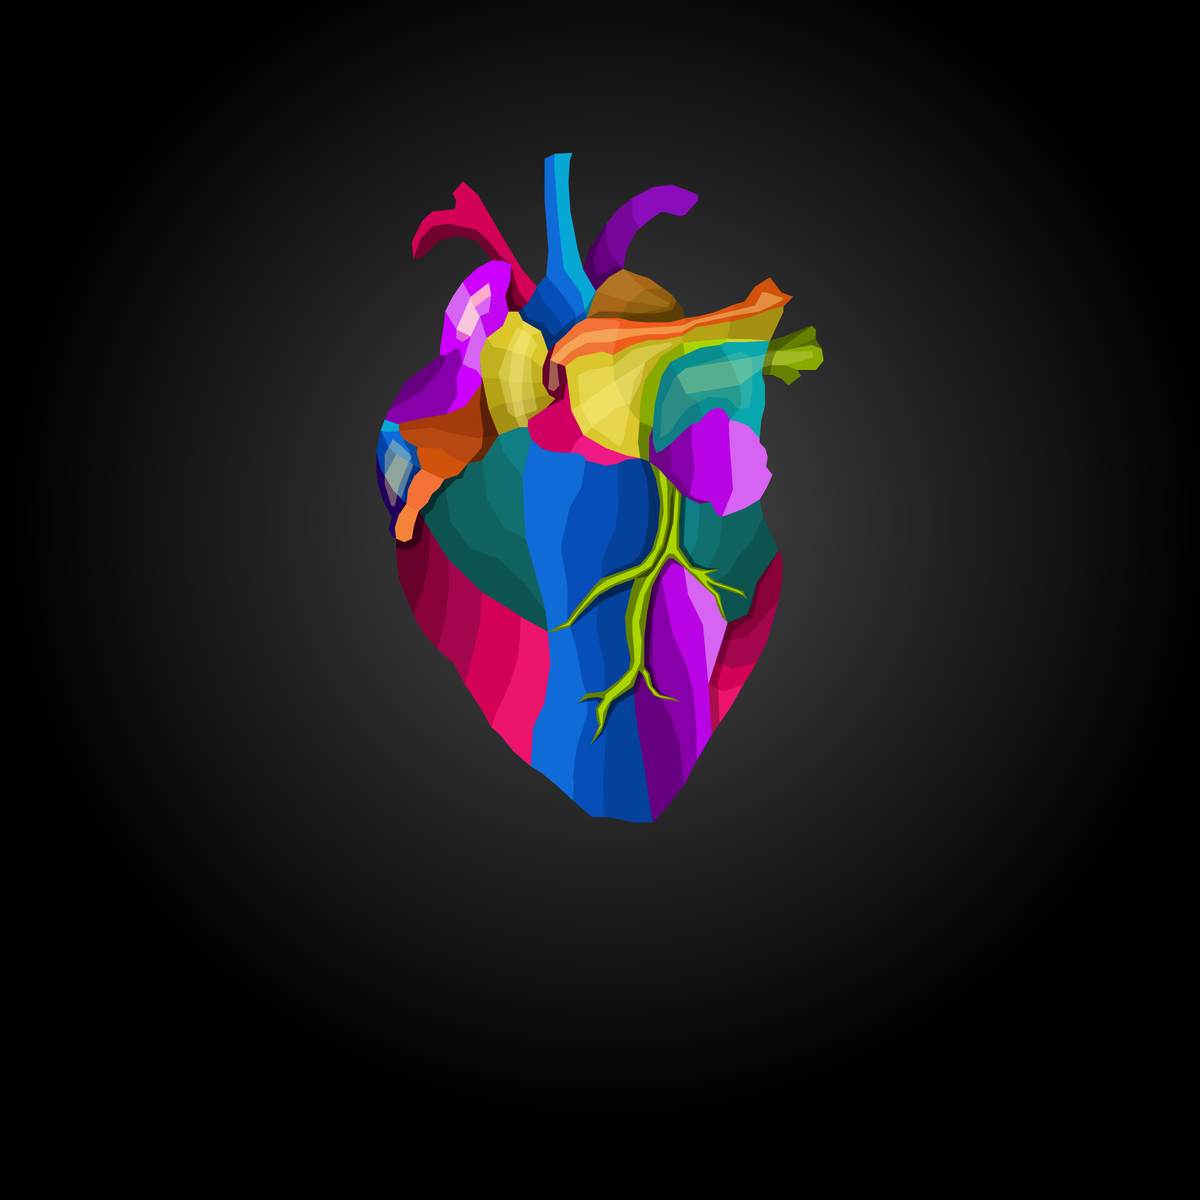 colorful heart beautiful creative artwork vector illustration by ...